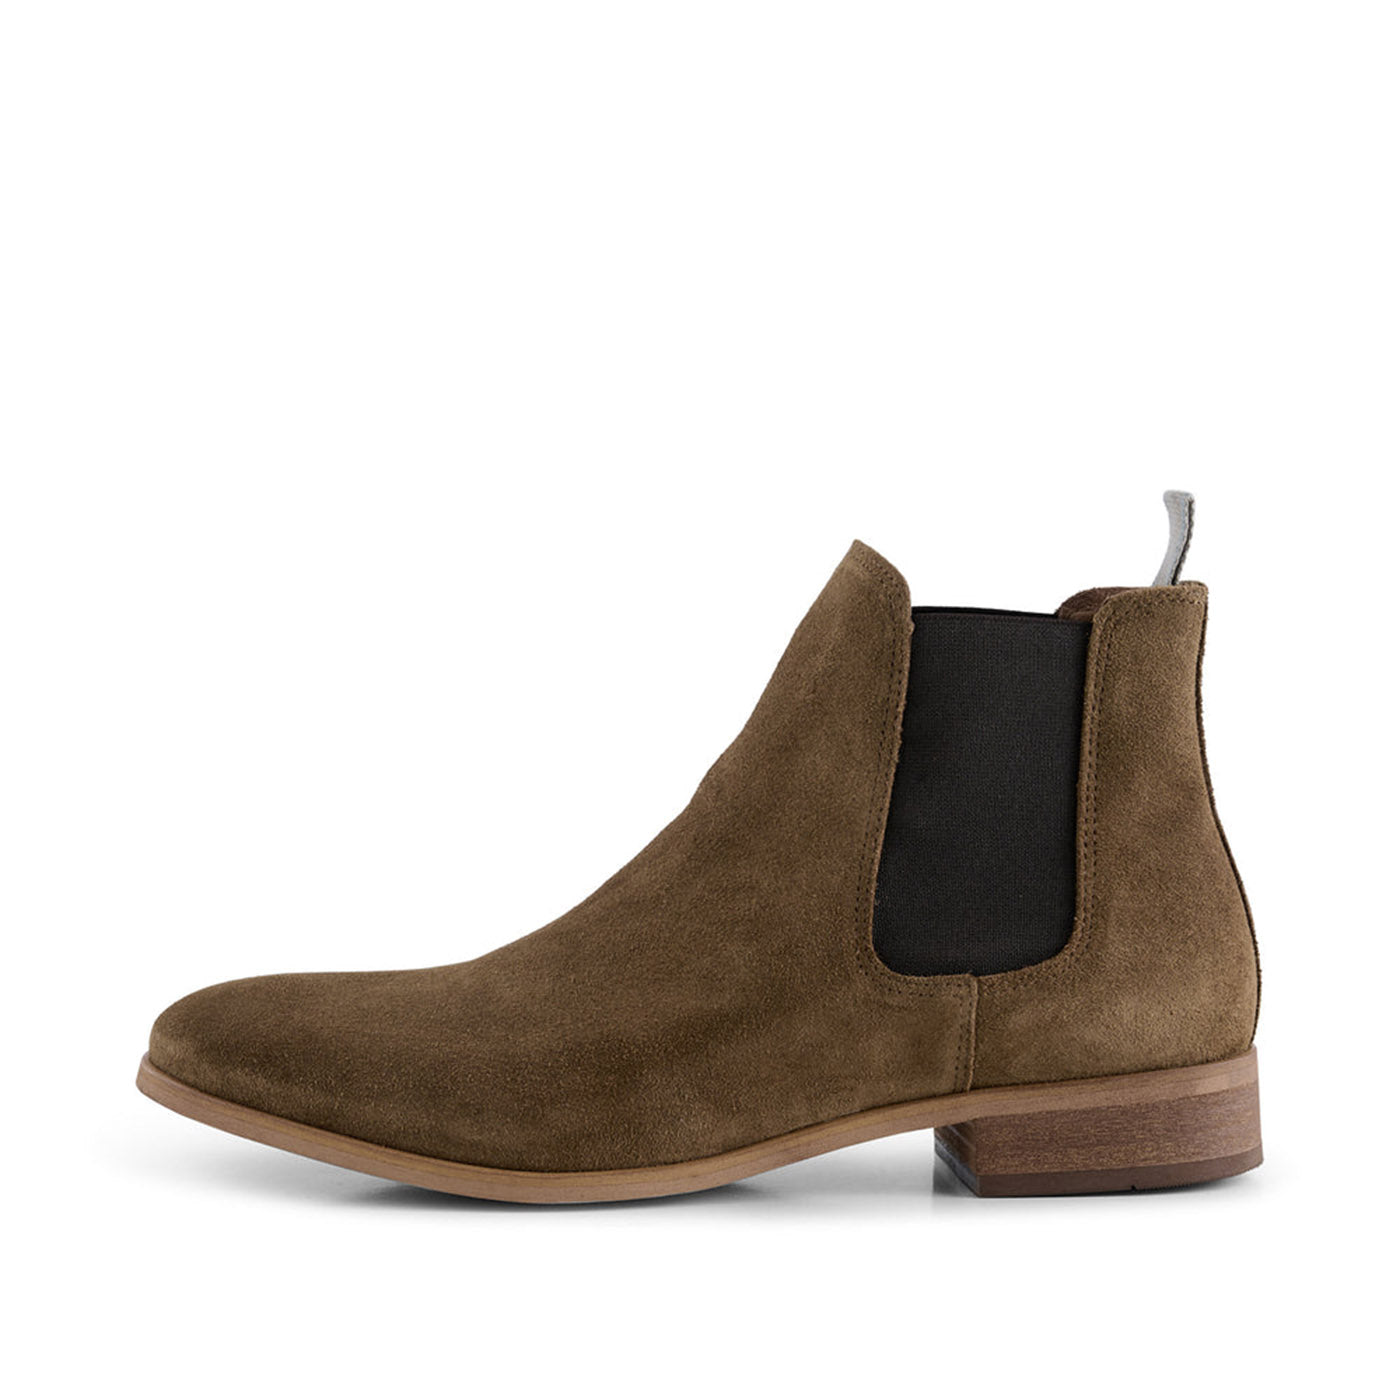 Dev chelsea boot suede - TOBACCO – SHOE THE BEAR US